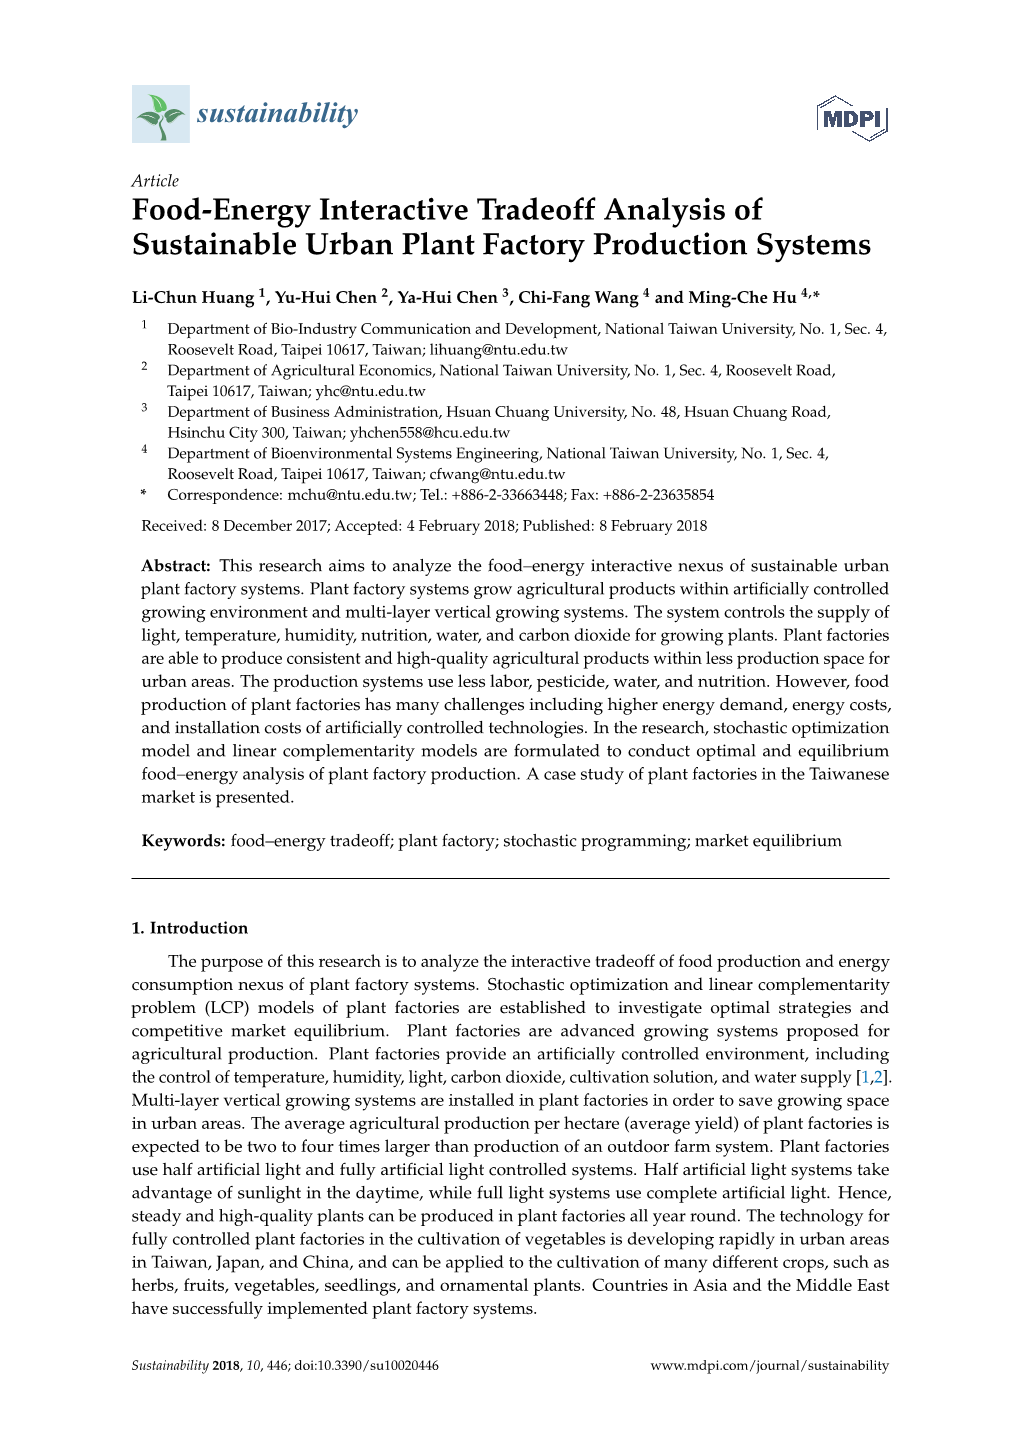 Food-Energy Interactive Tradeoff Analysis of Sustainable Urban Plant Factory Production Systems